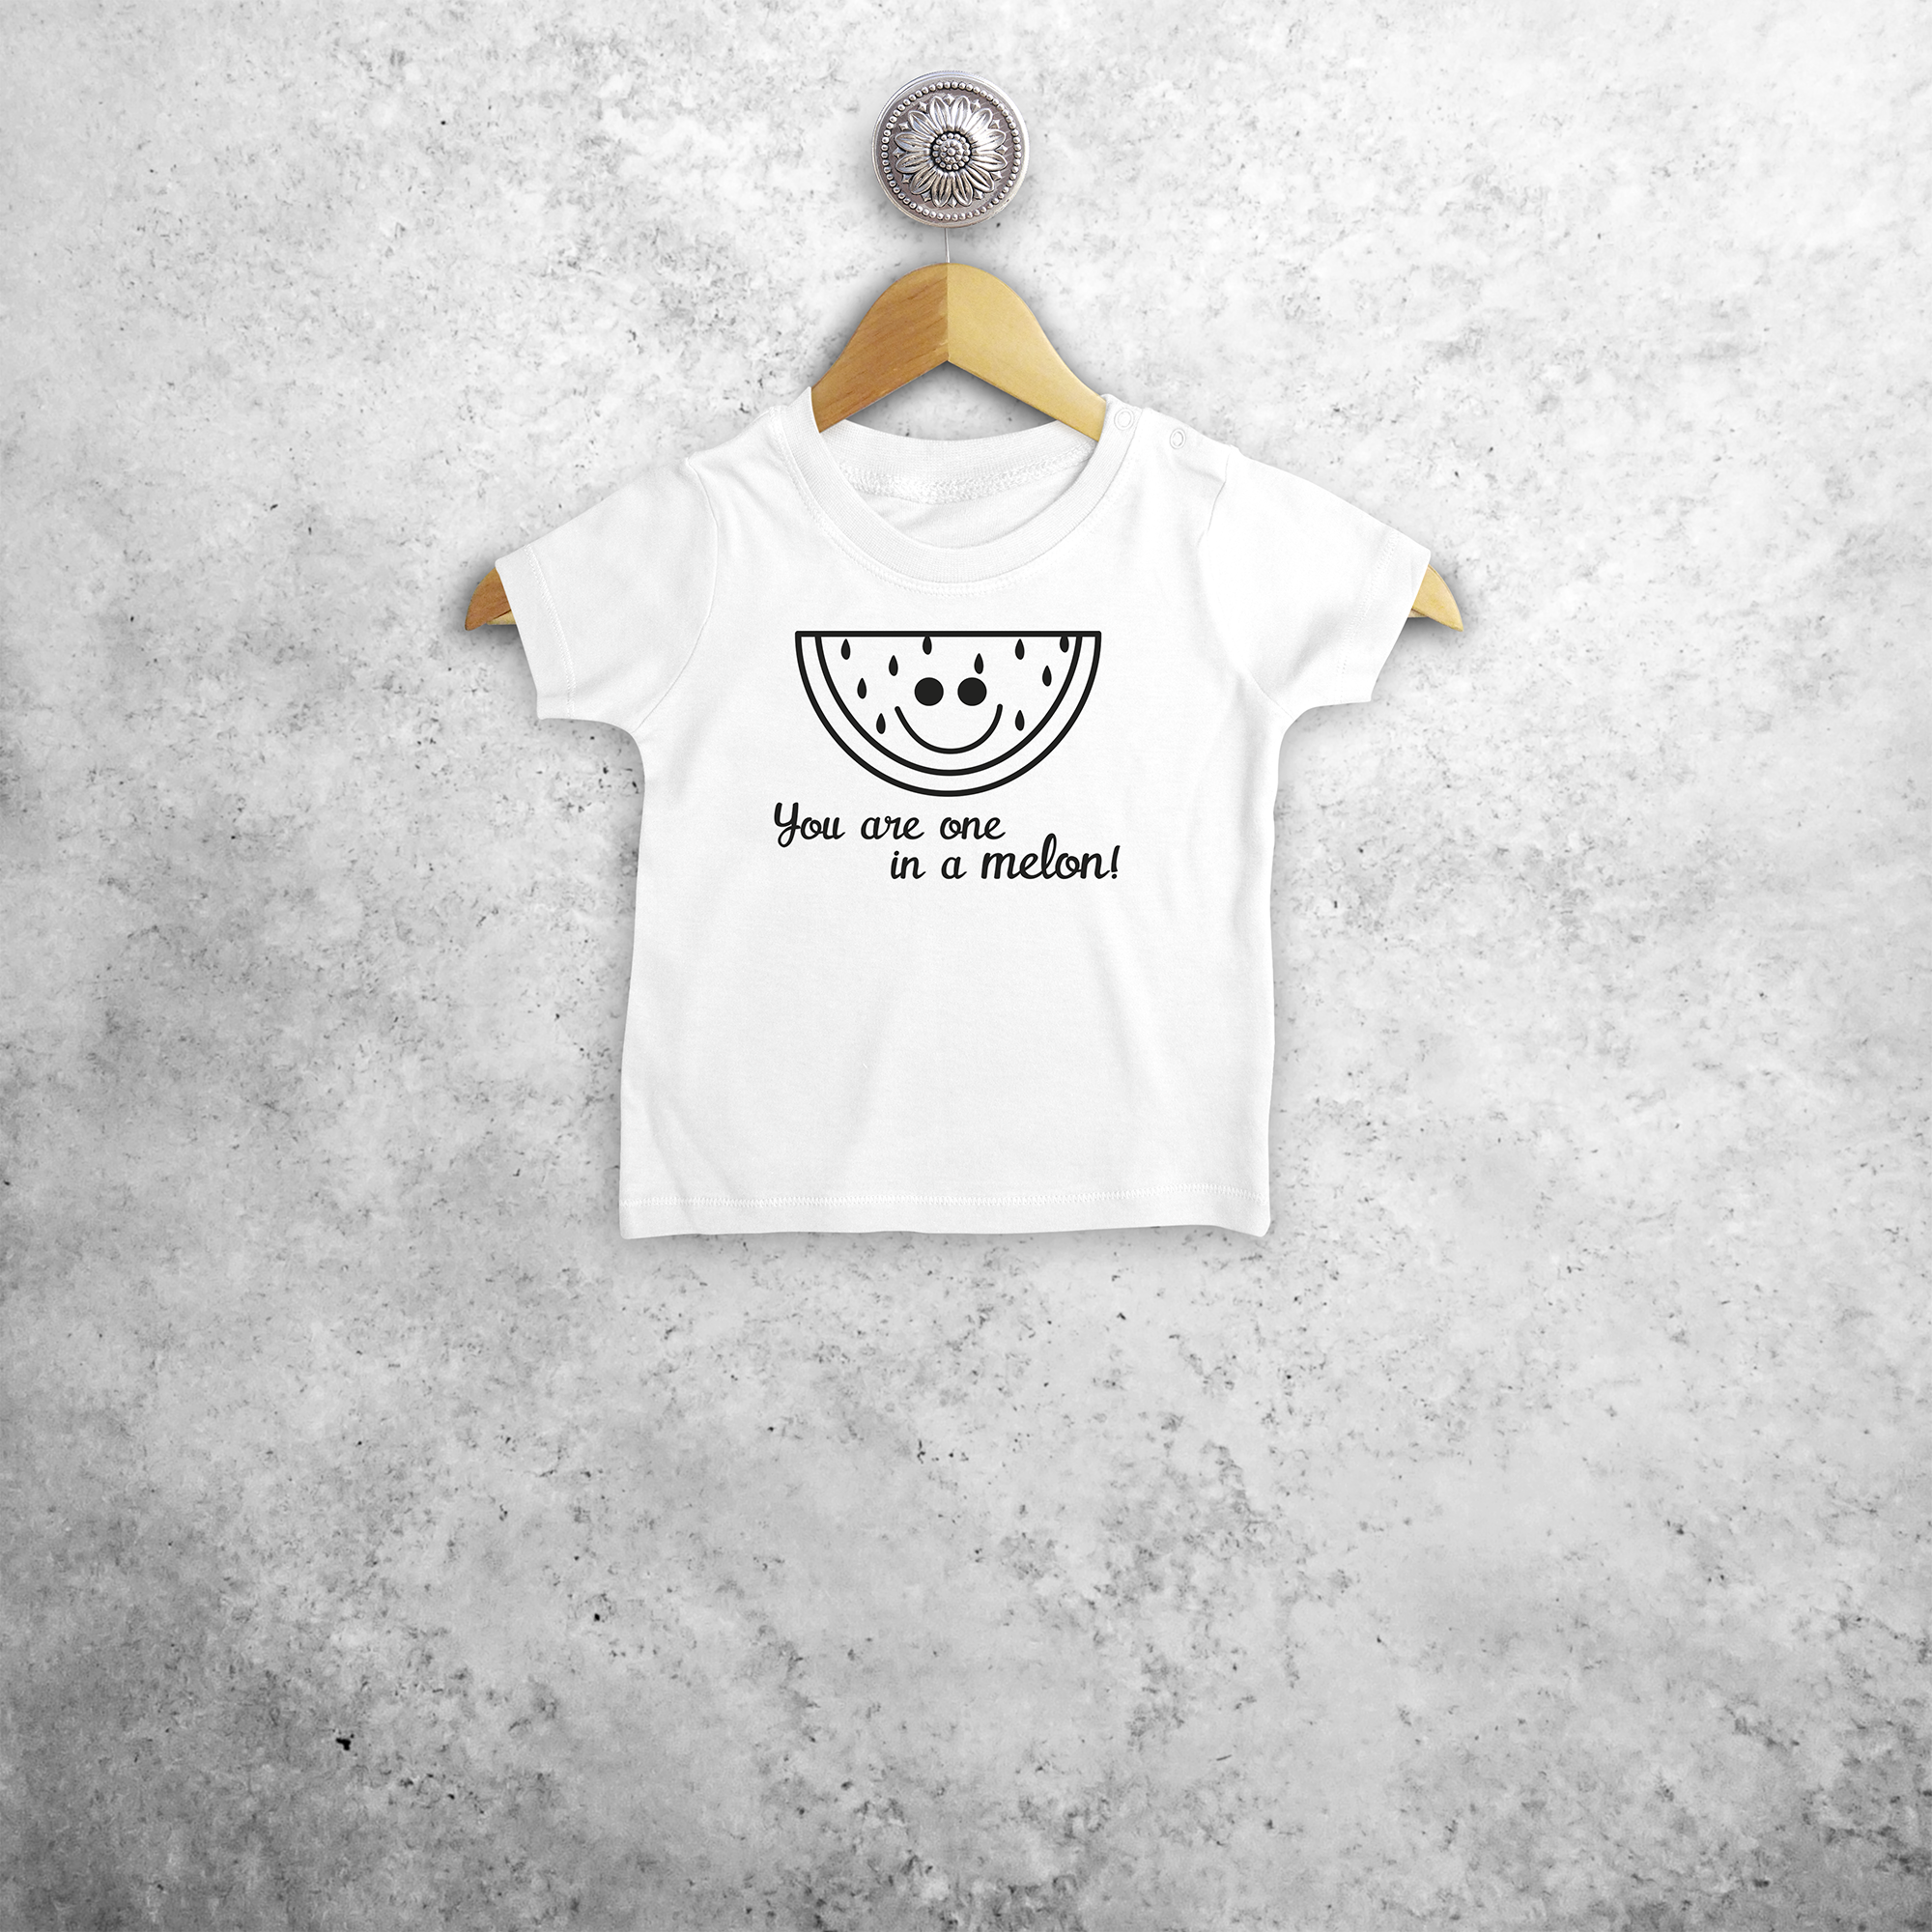 'You are one in a melon' baby shortsleeve shirt